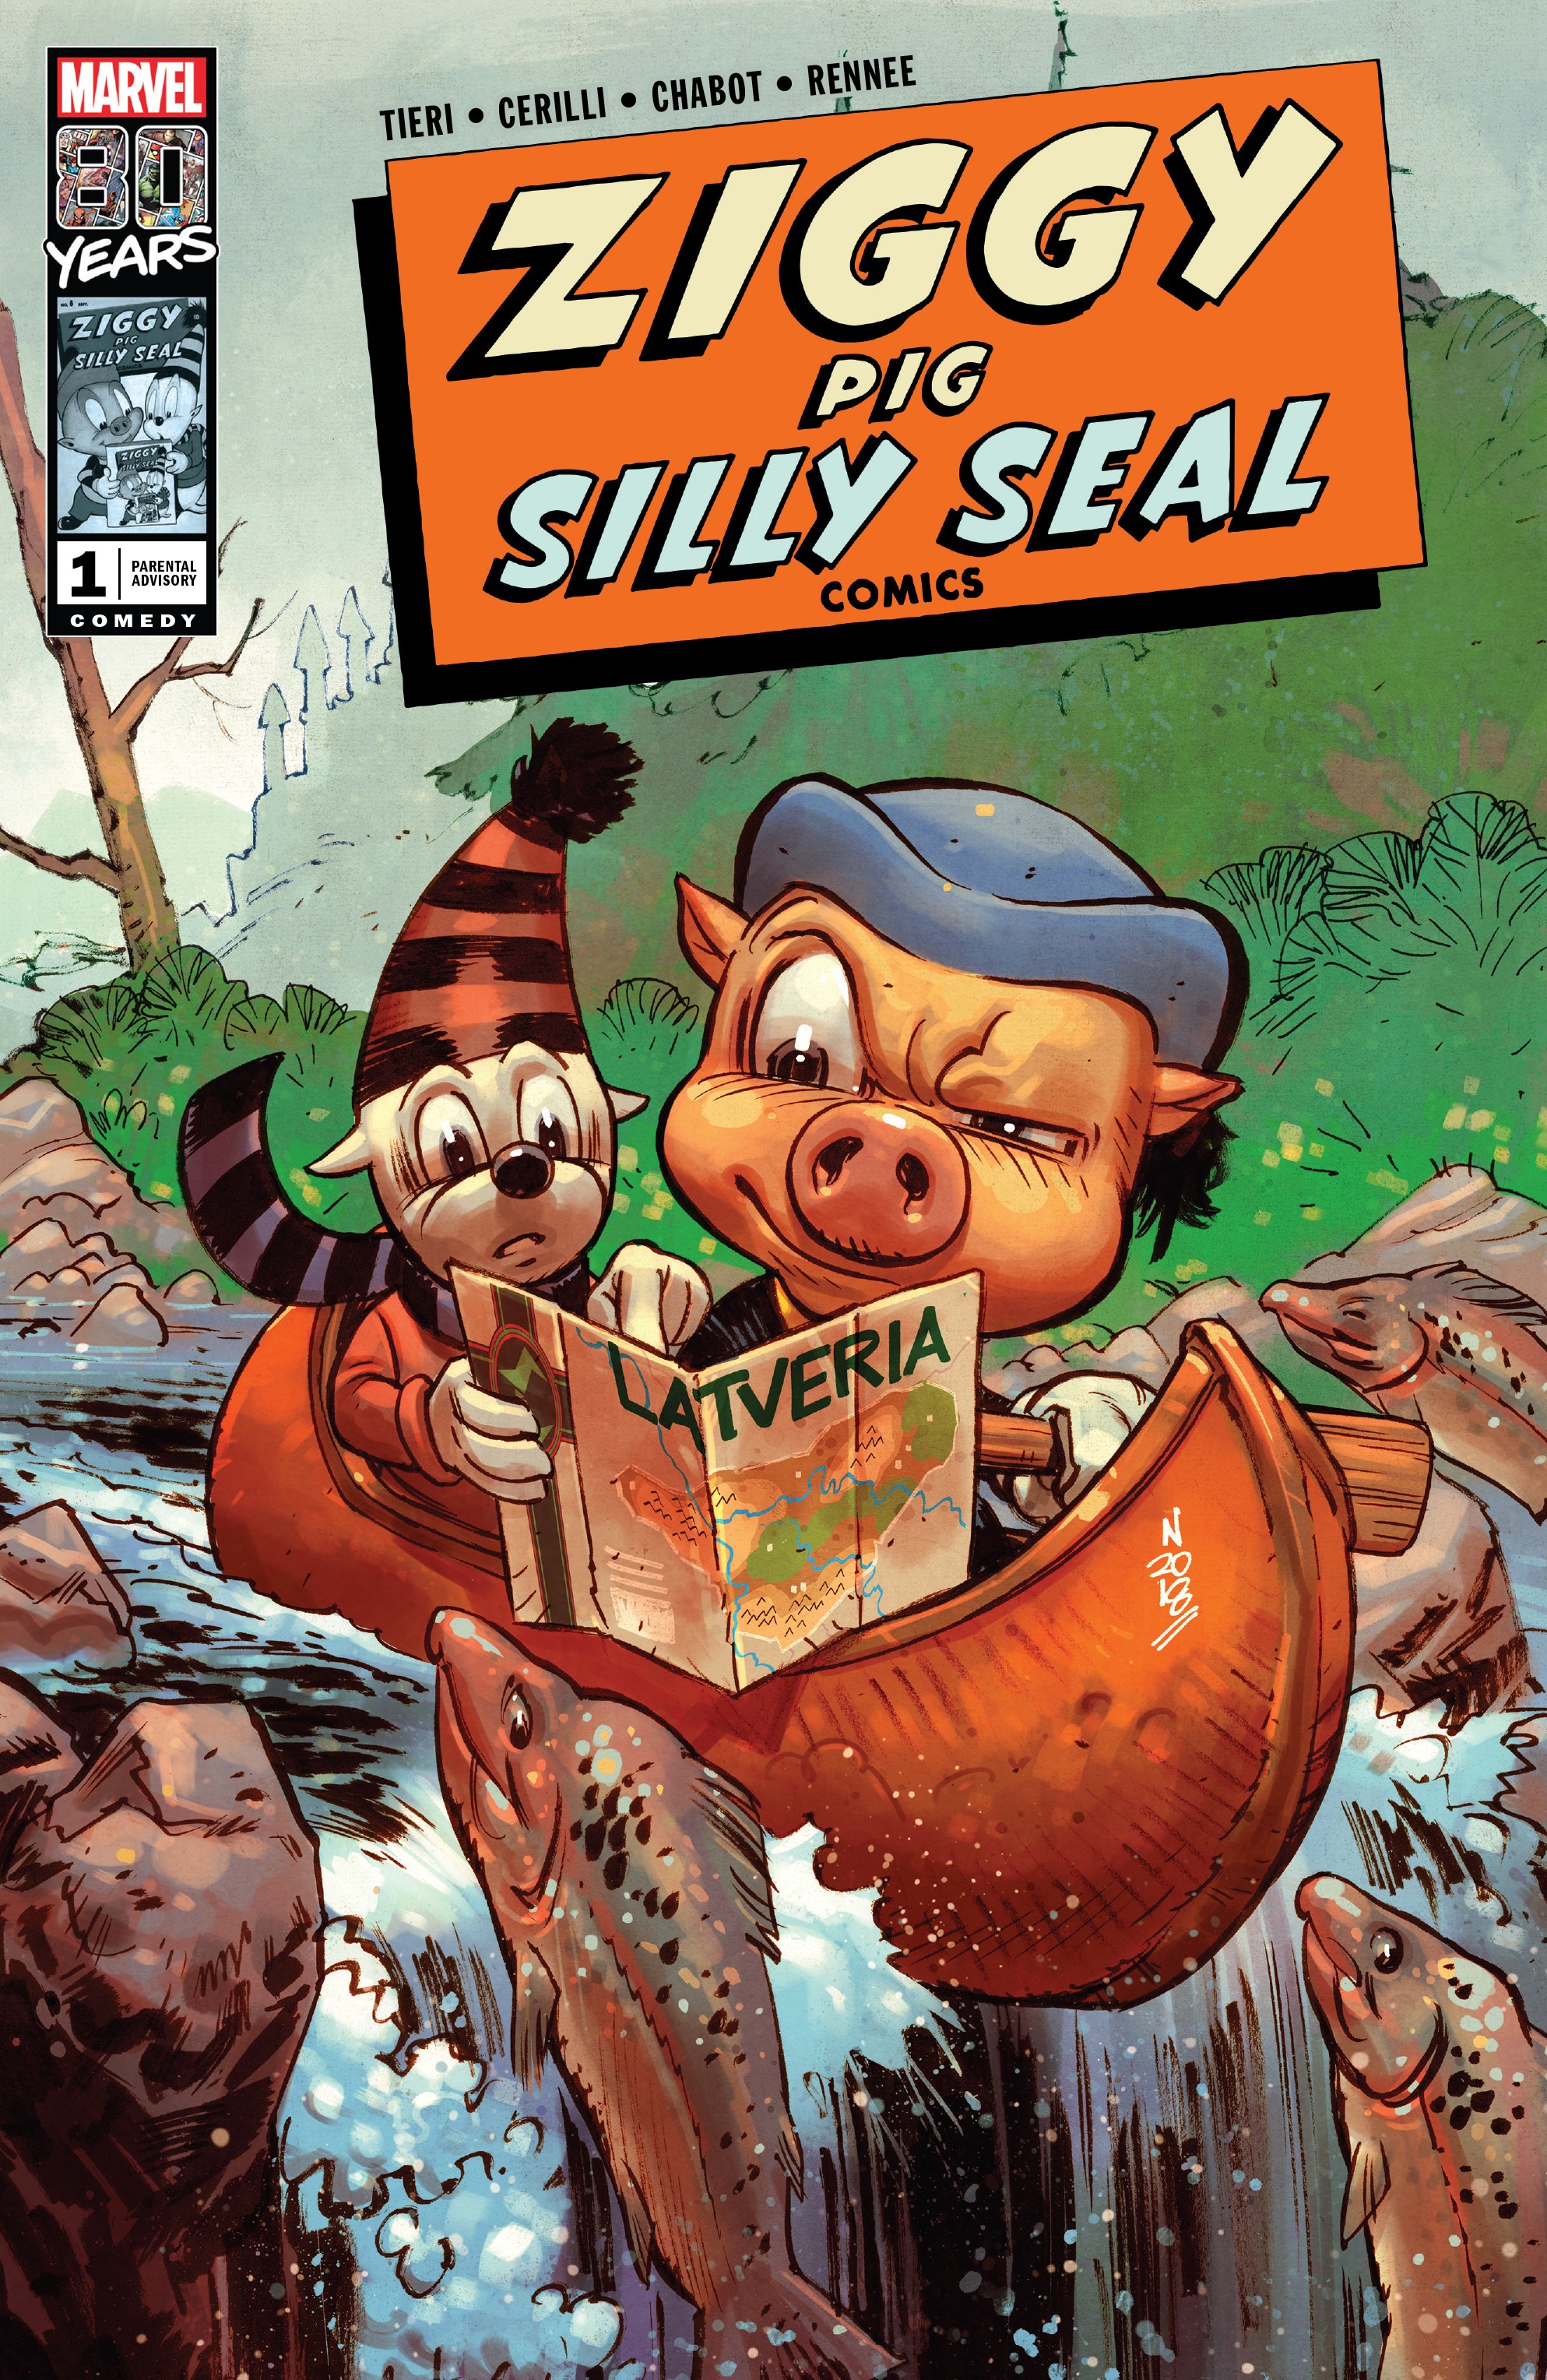 Read online Ziggy Pig - Silly Seal Comics comic -  Issue # Full - 1